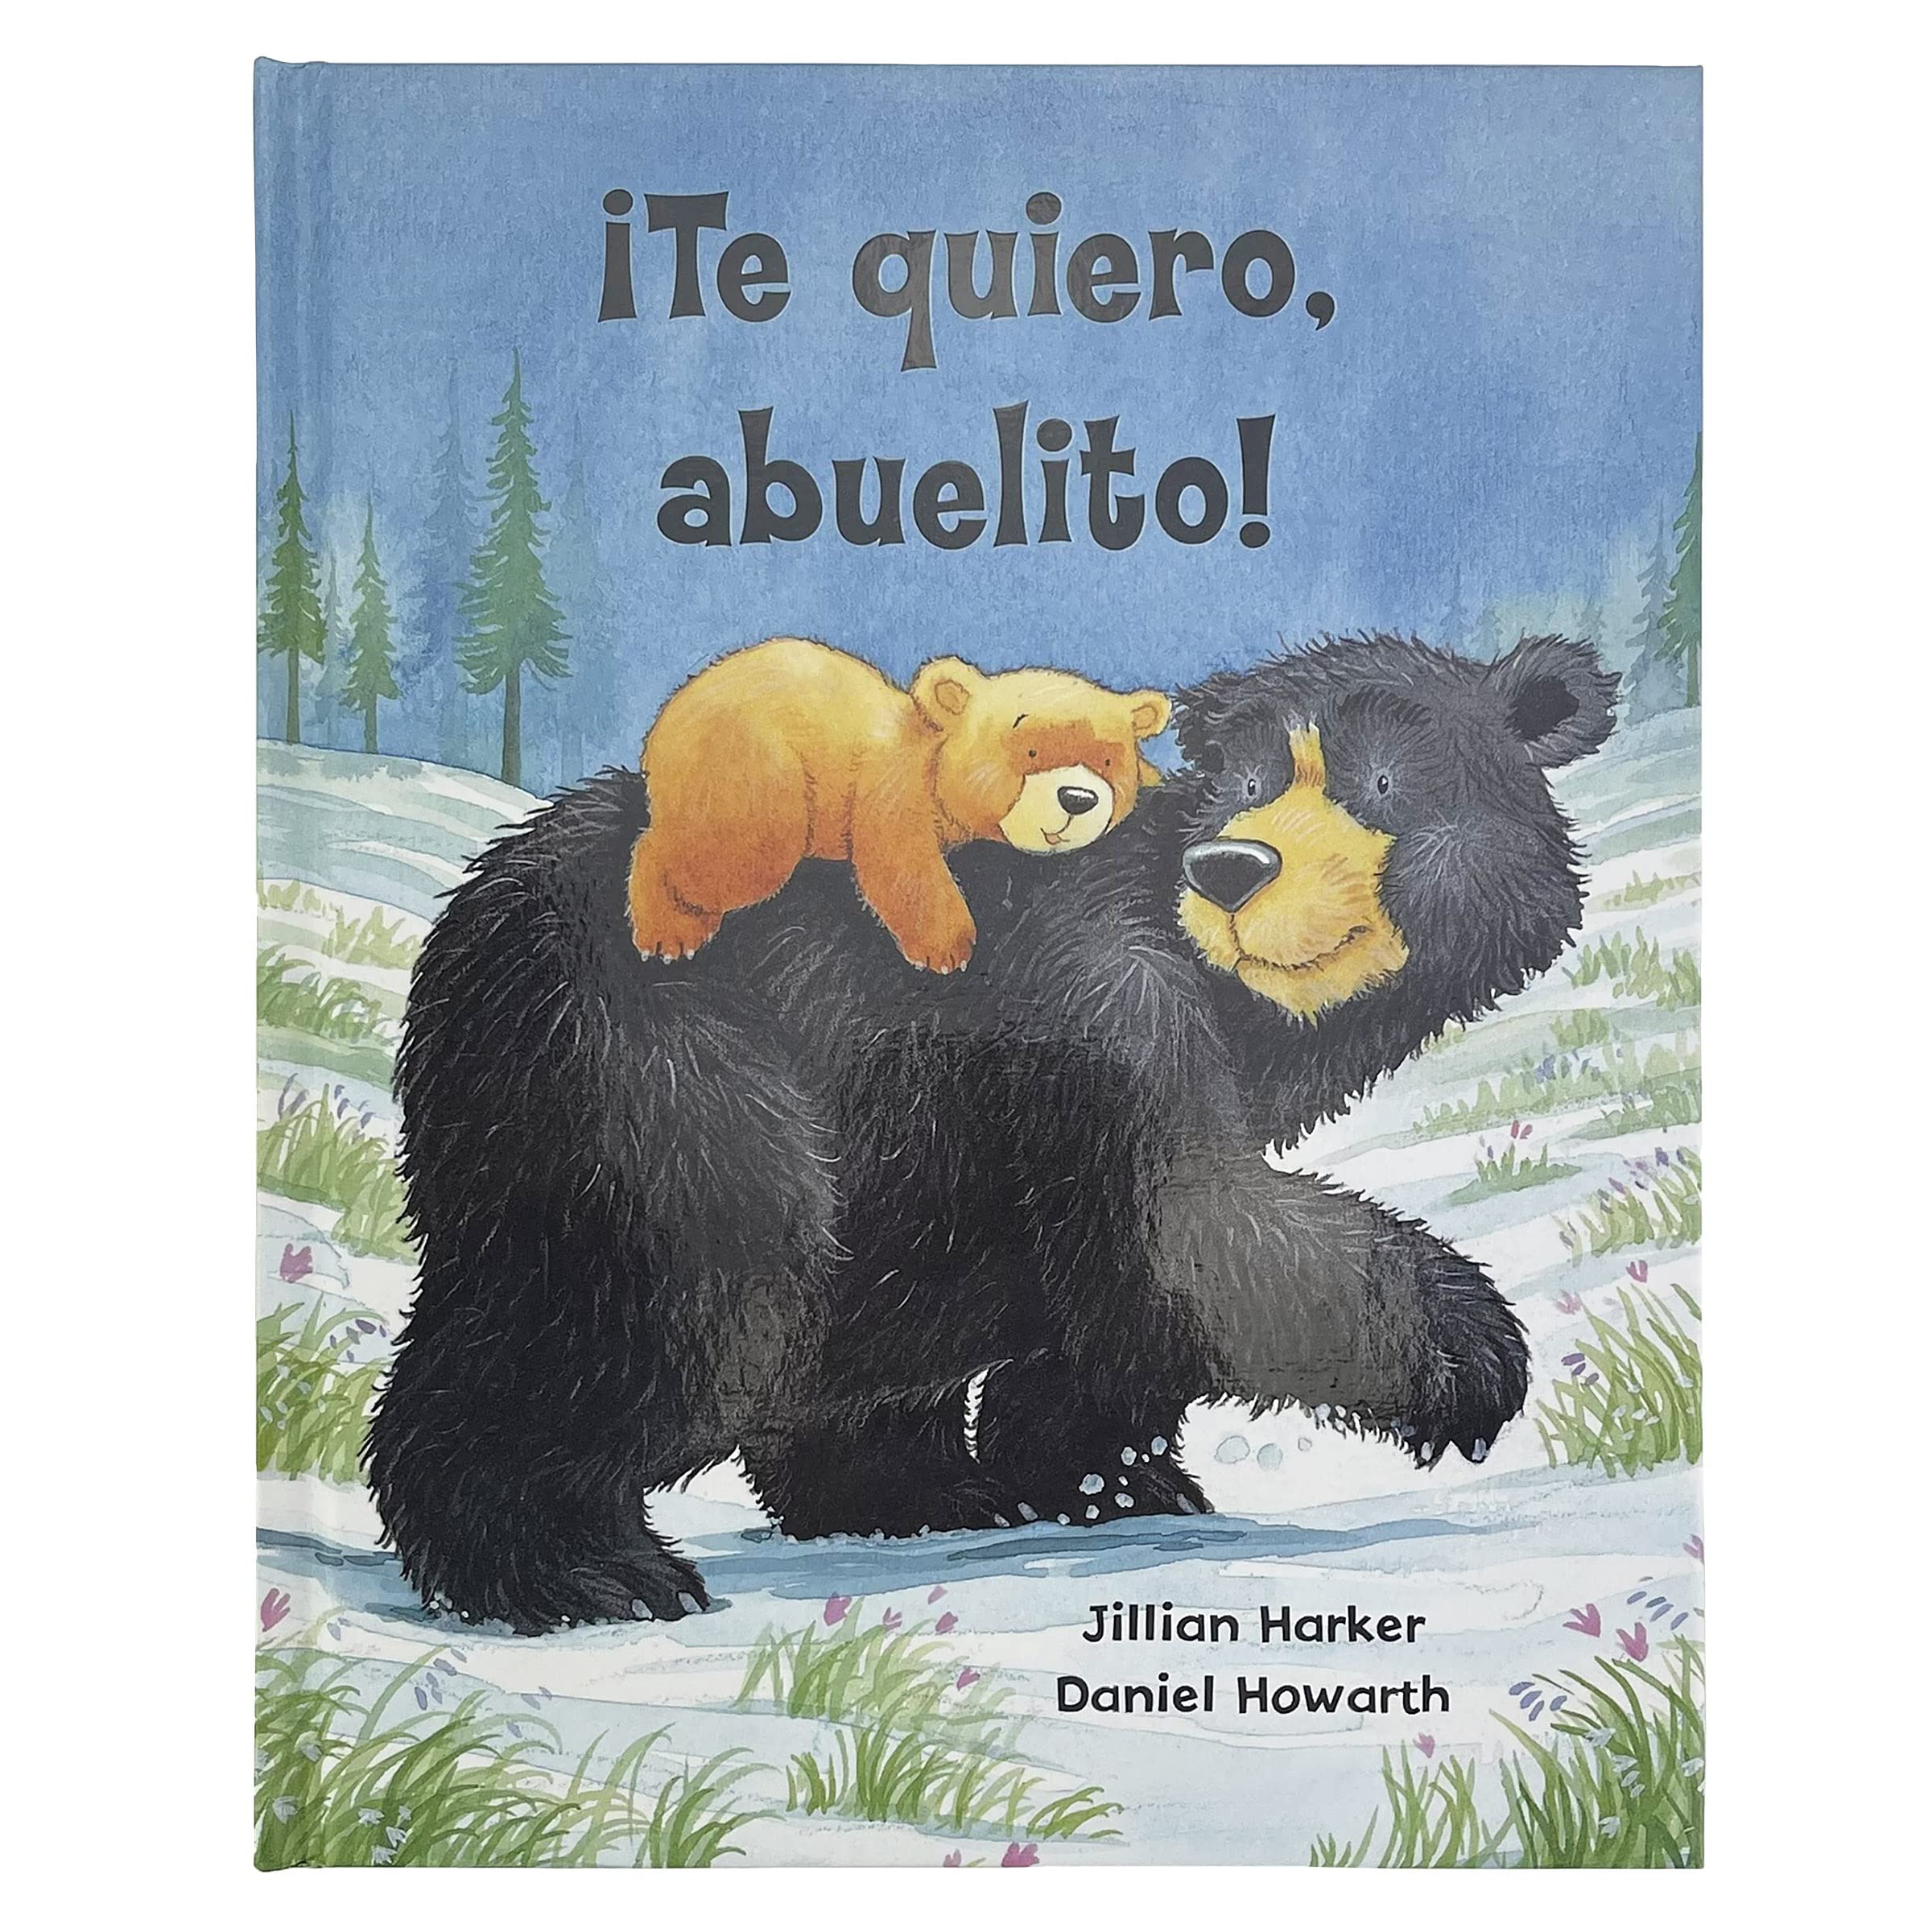 ¡Te quiero, abuelito! / I Love You, Grandpa: A Tale of Encouragement and Love between a Grandfather and his grandchild, Picture Book (Spanish Edition)